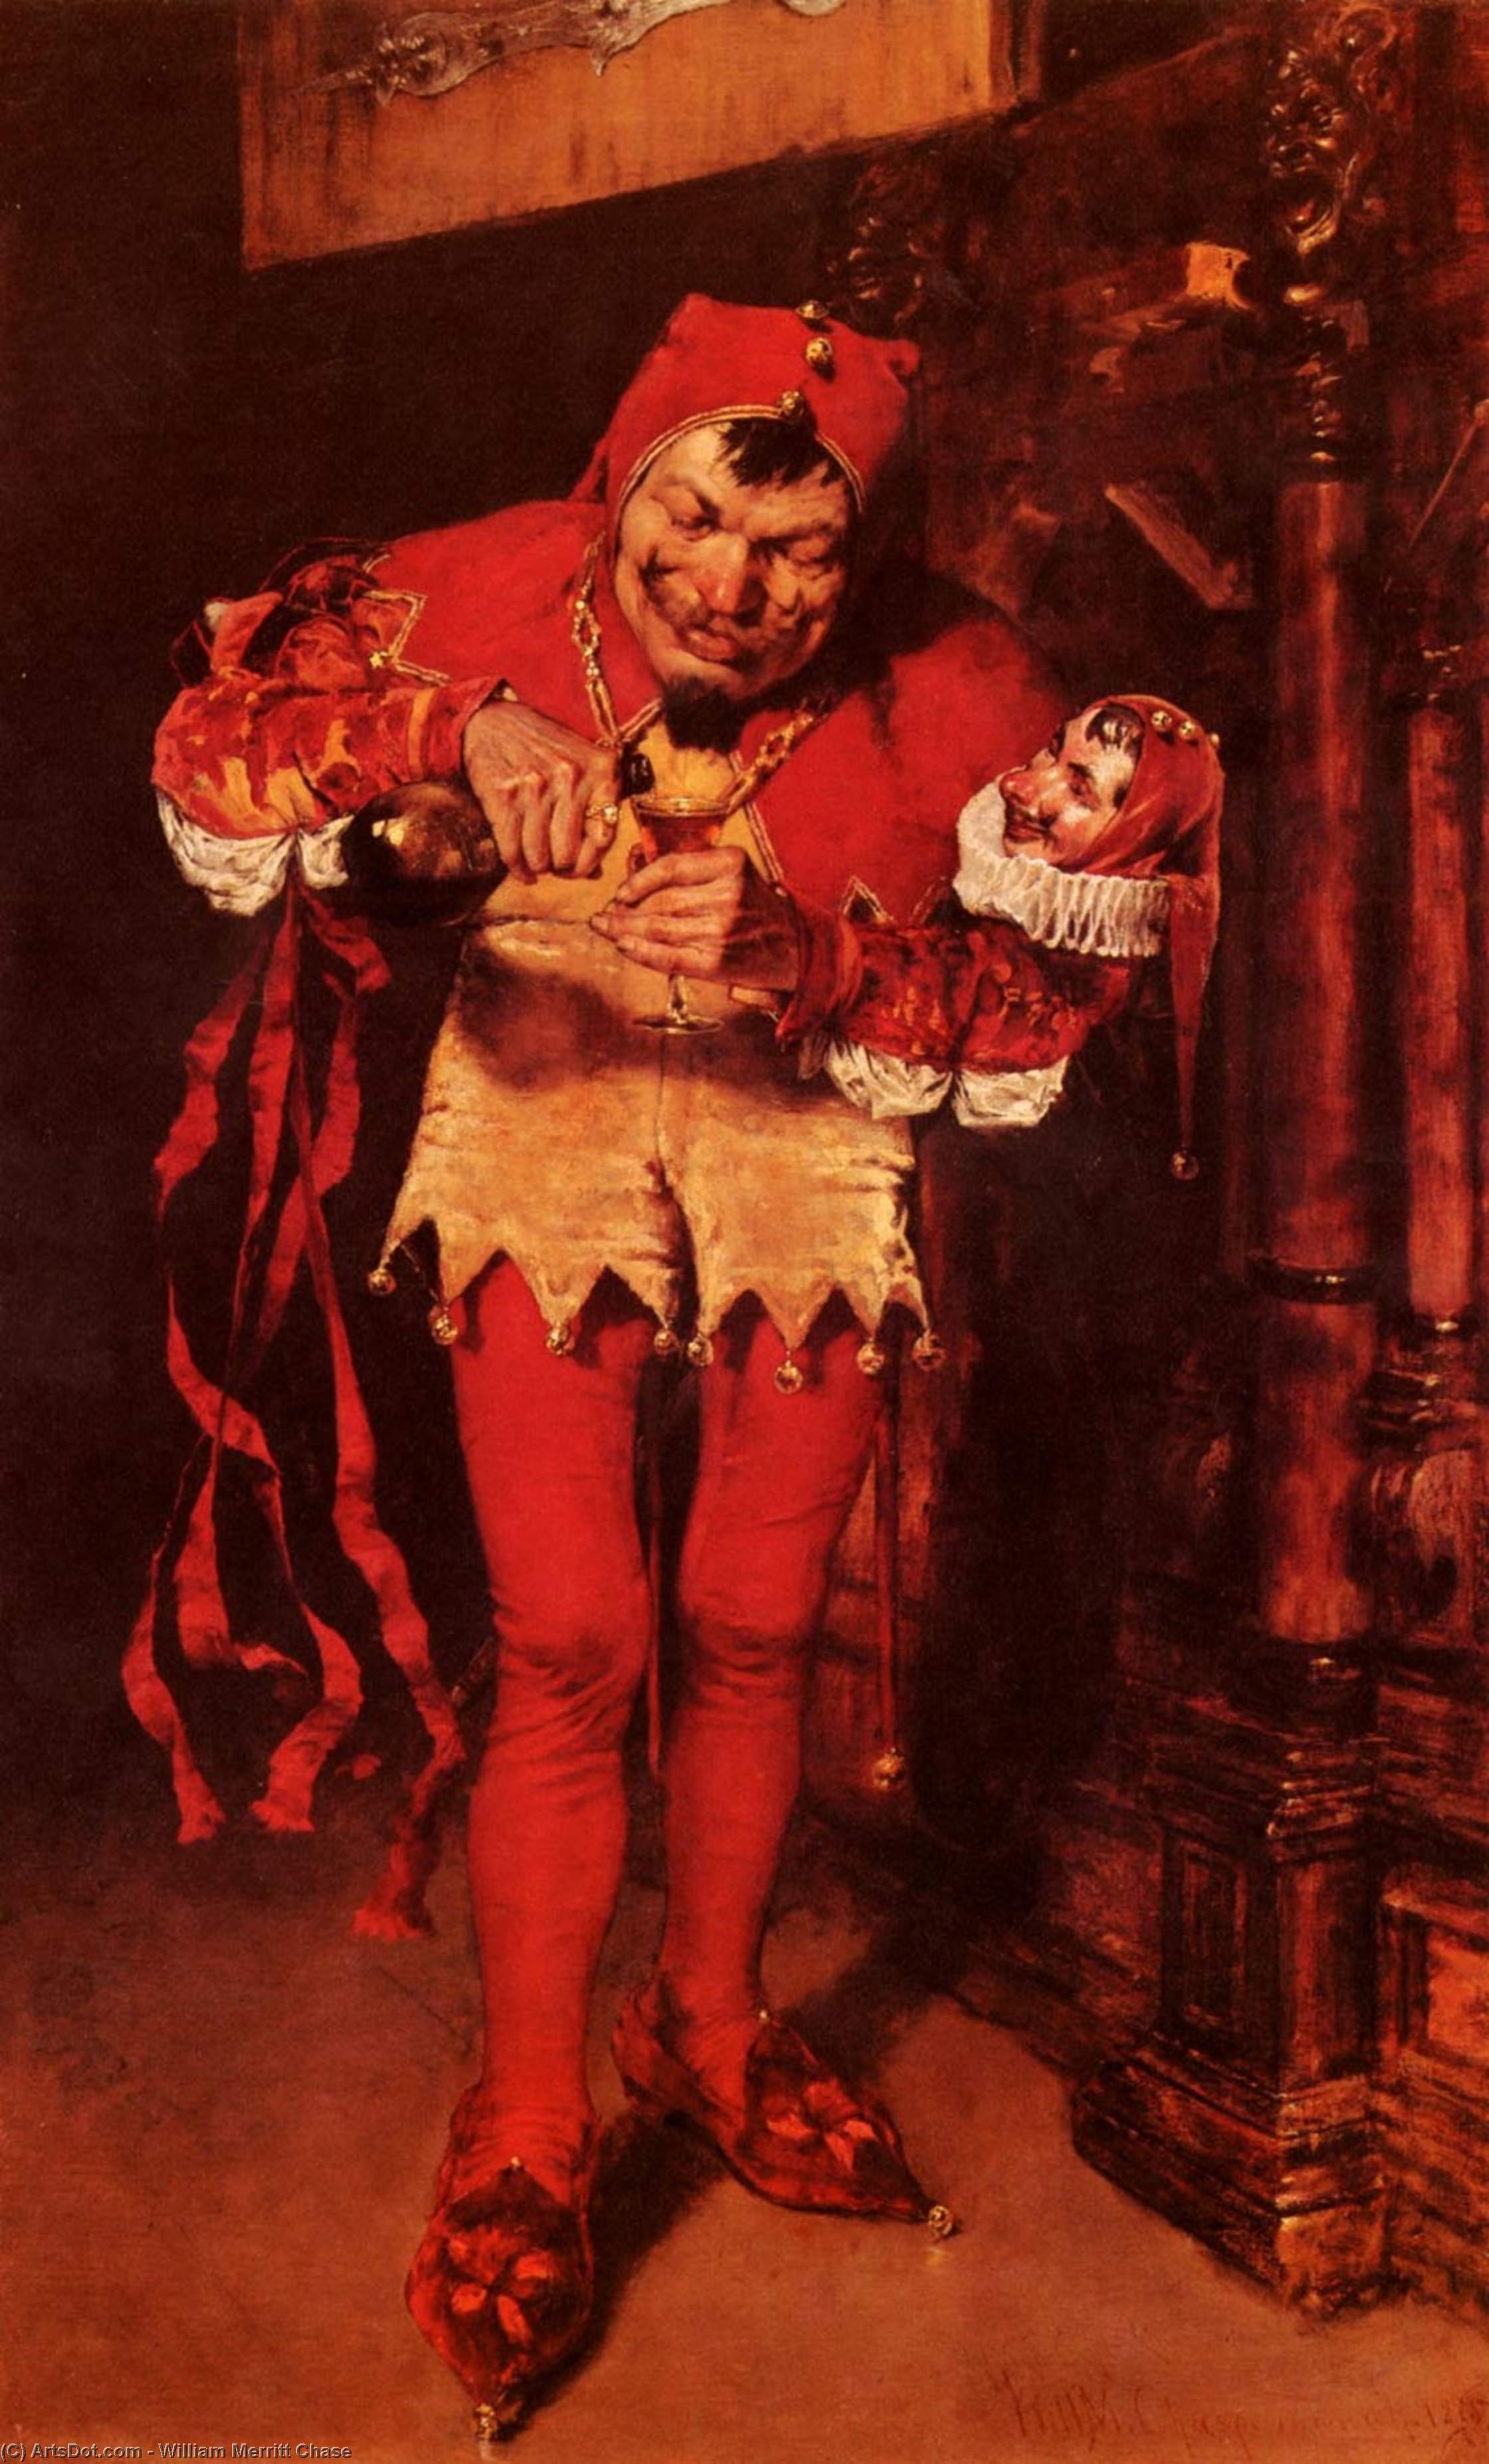 Buy Museum Art Reproductions Keying Up, The Court Jester by William Merritt Chase (1849-1916, United States) | ArtsDot.com